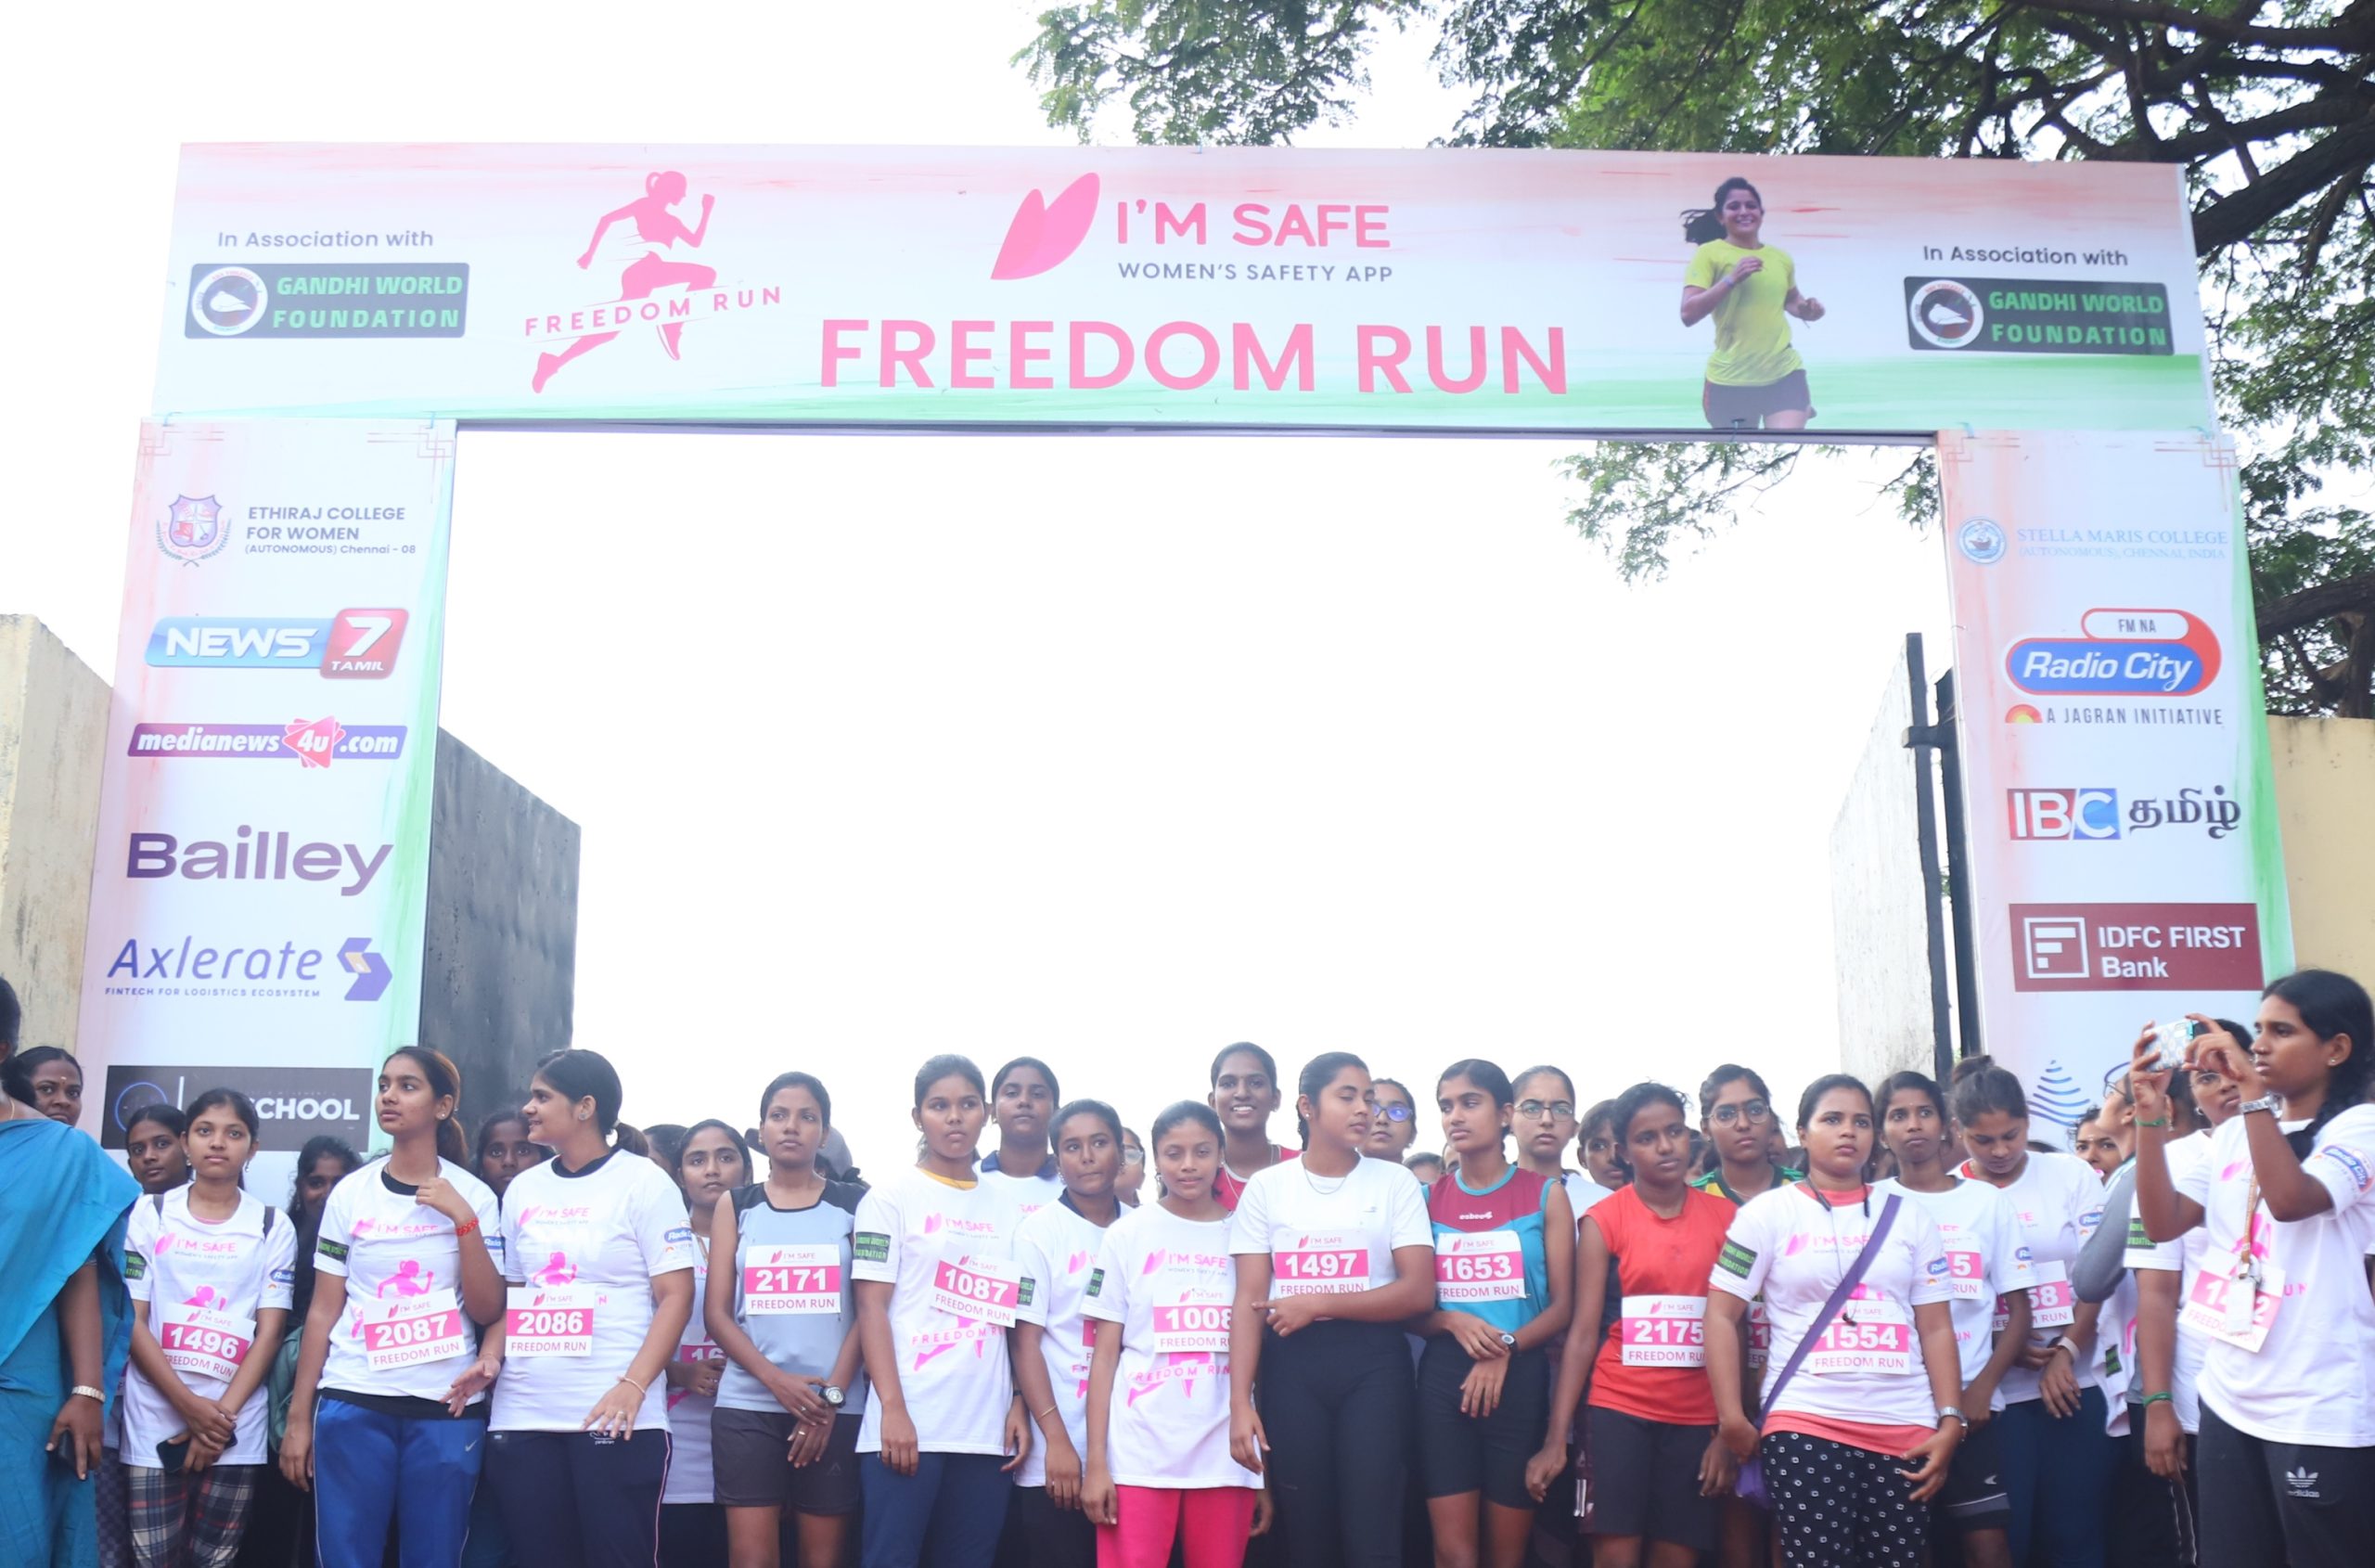 Unite and Empower: I’m Safe Freedom Run – Steps Towards a Brighter Tomorrow